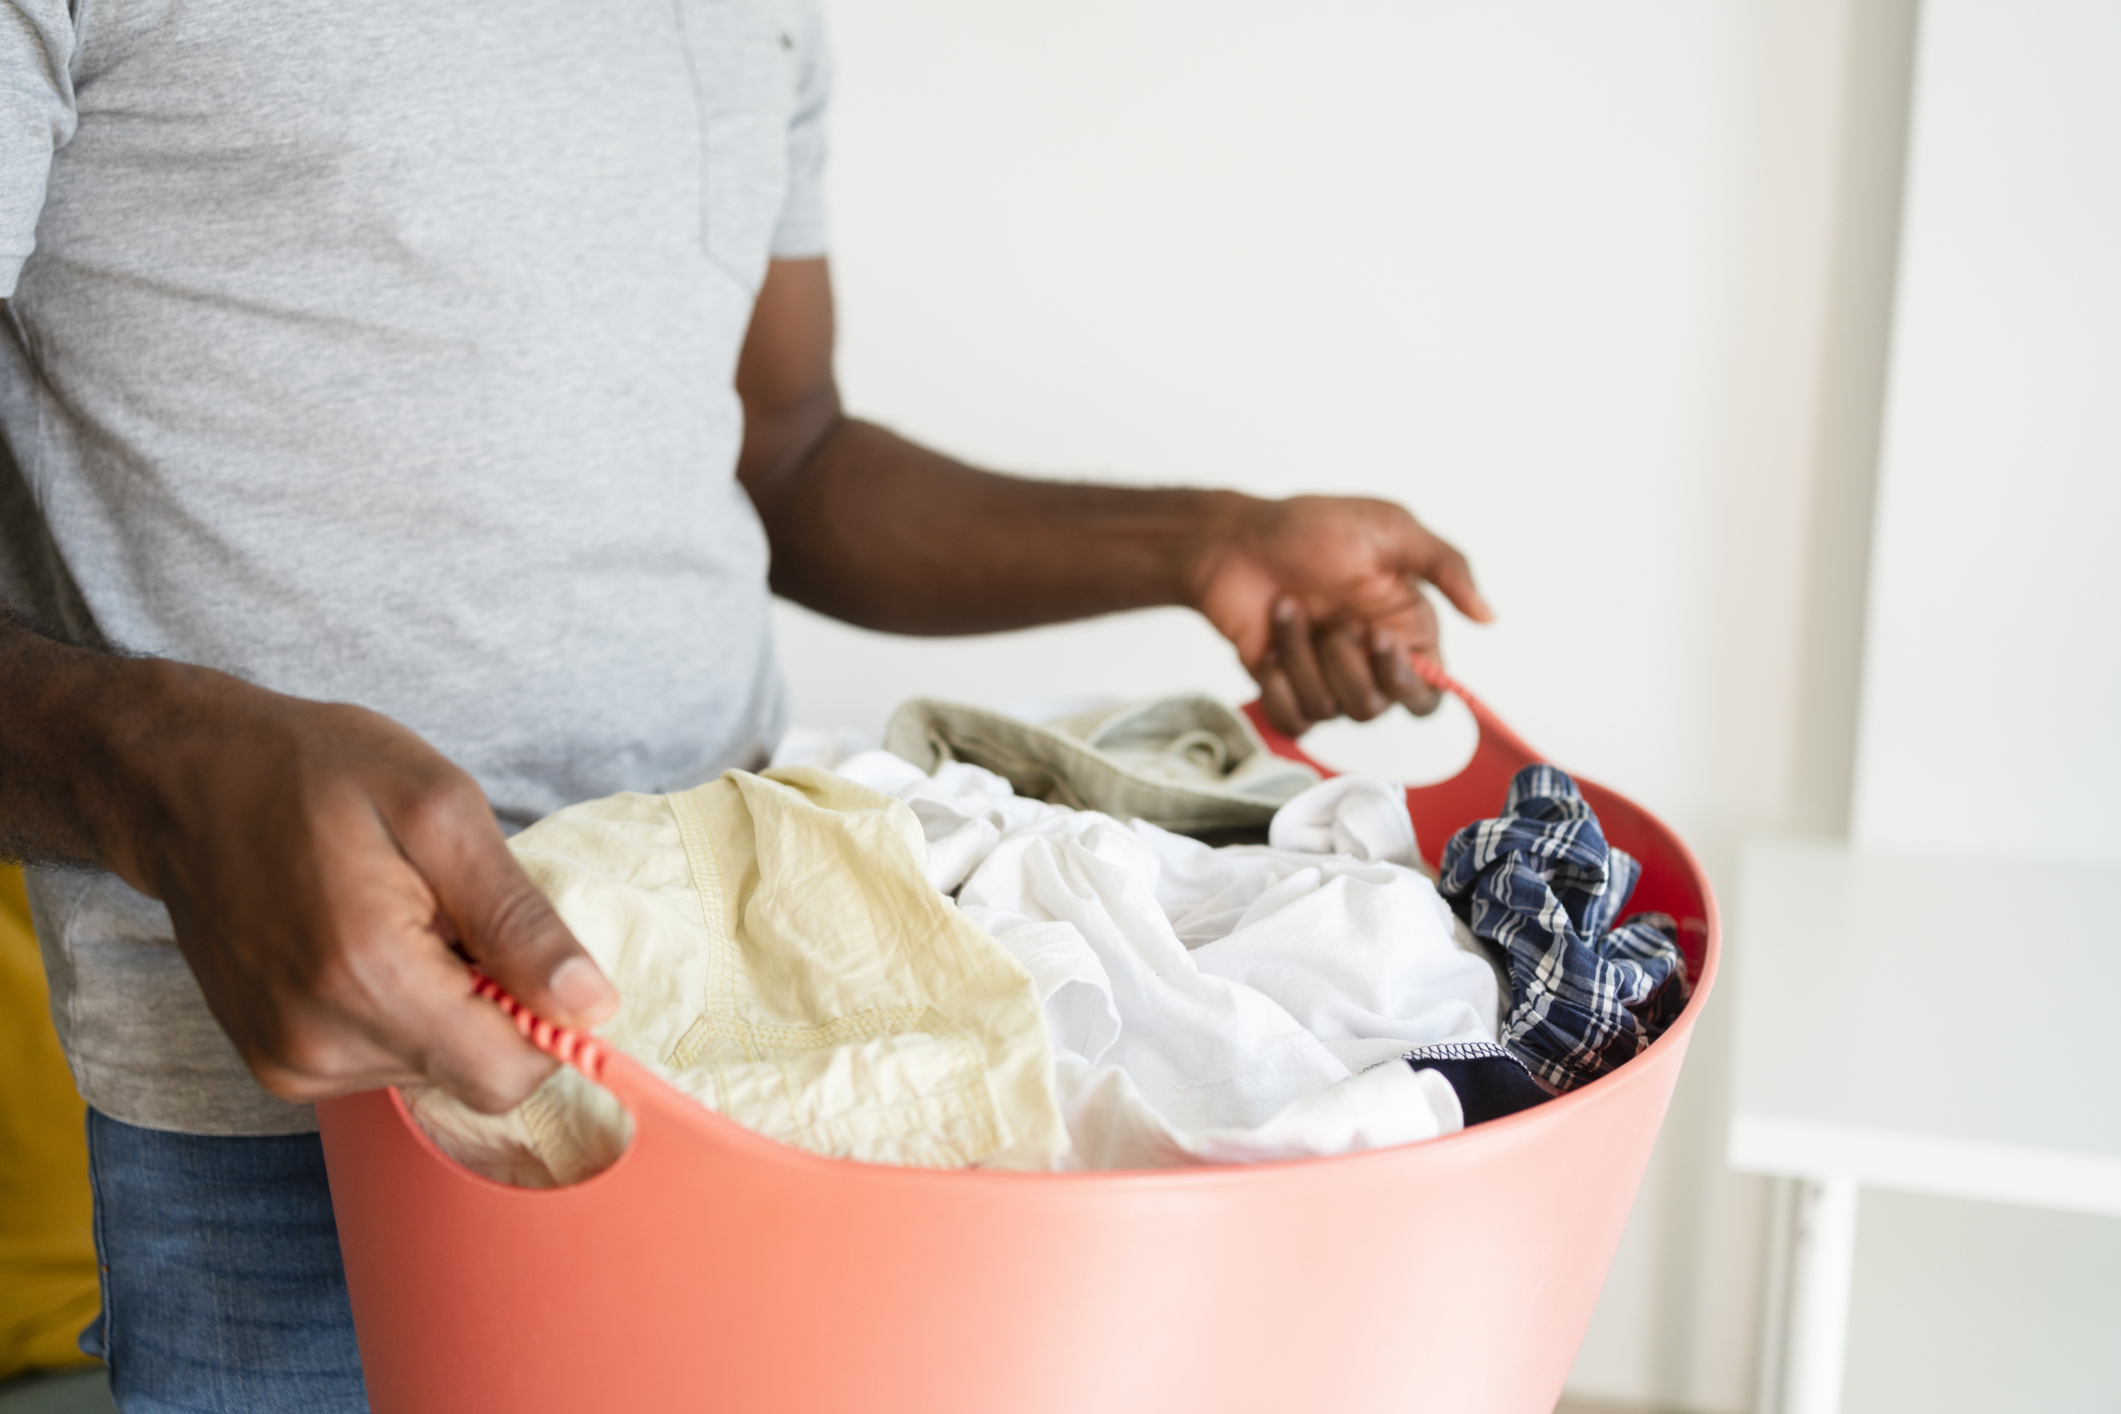 Person holding a laundry basket, focusing on shared household chores